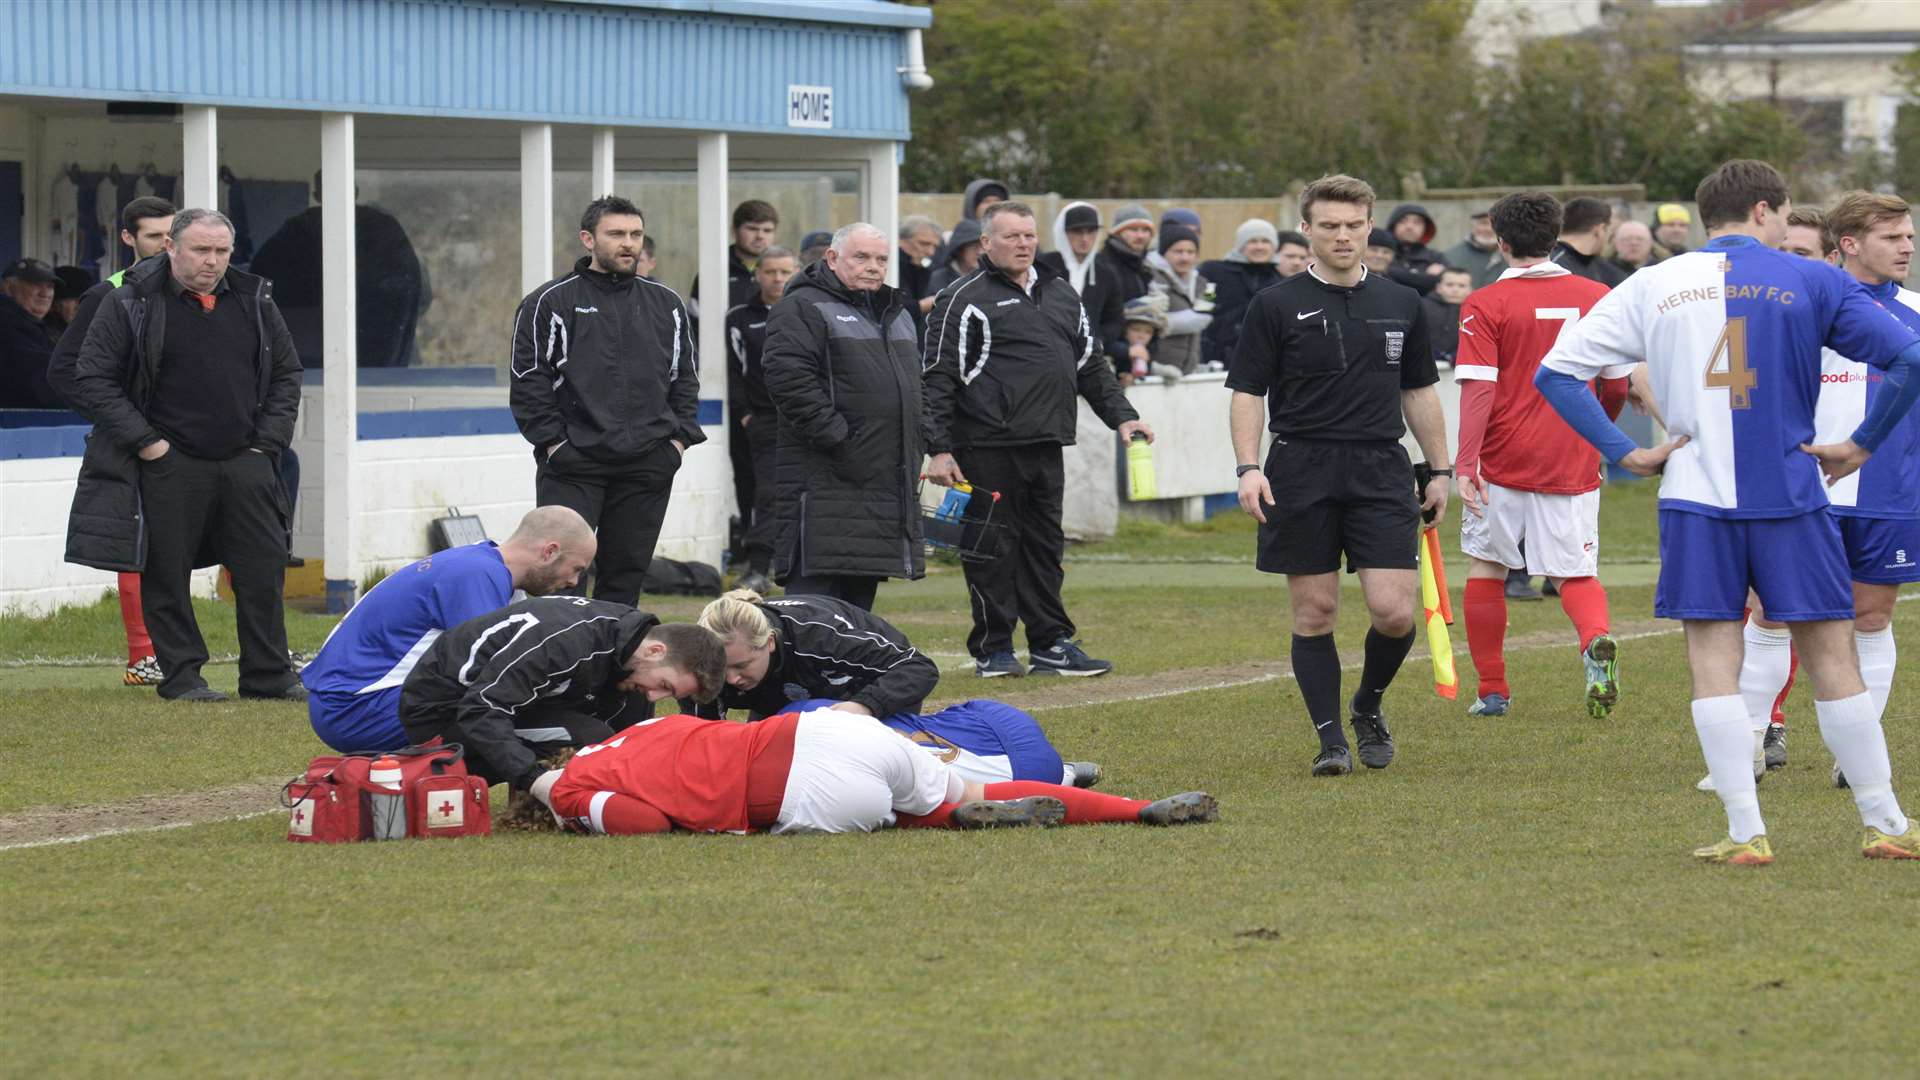 Players and officials gathered around the two injured players. Picture: Chris Davey.